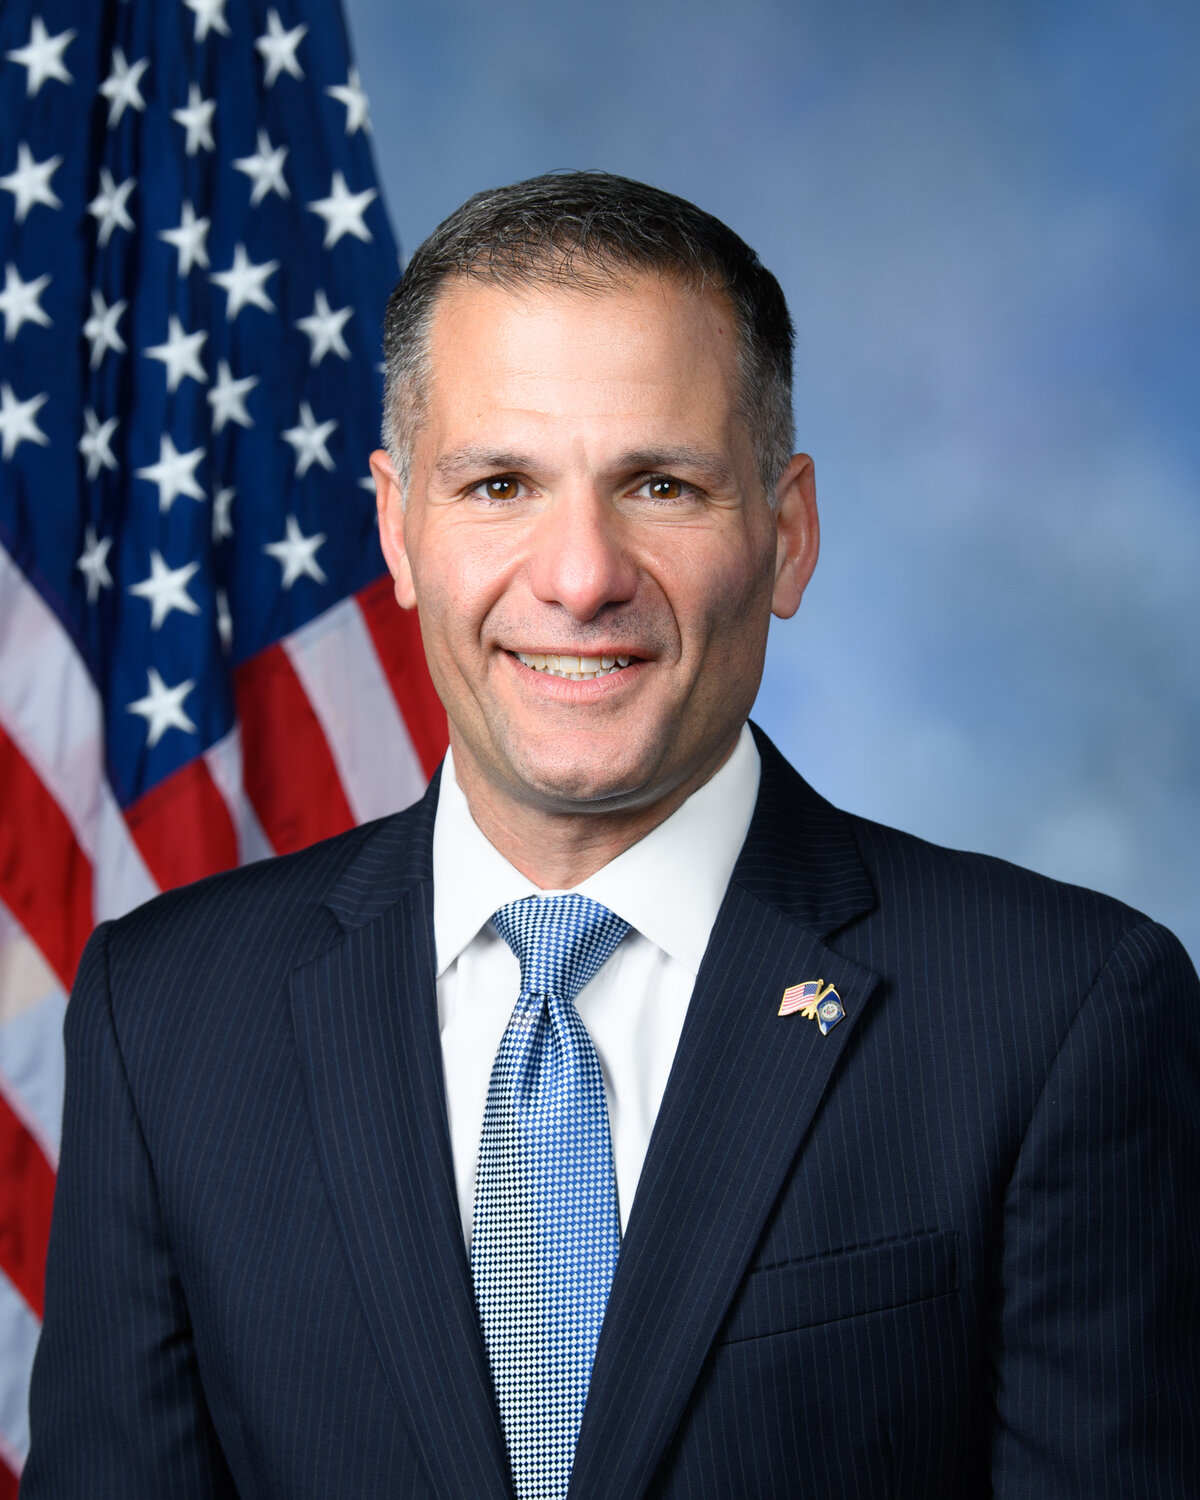 U.S. Rep. Marc Molinaro will hold a telephone town hall meeting to discuss Medicare open enrollment on Wednesday, November 29. Sign up by Tuesday, November 28.